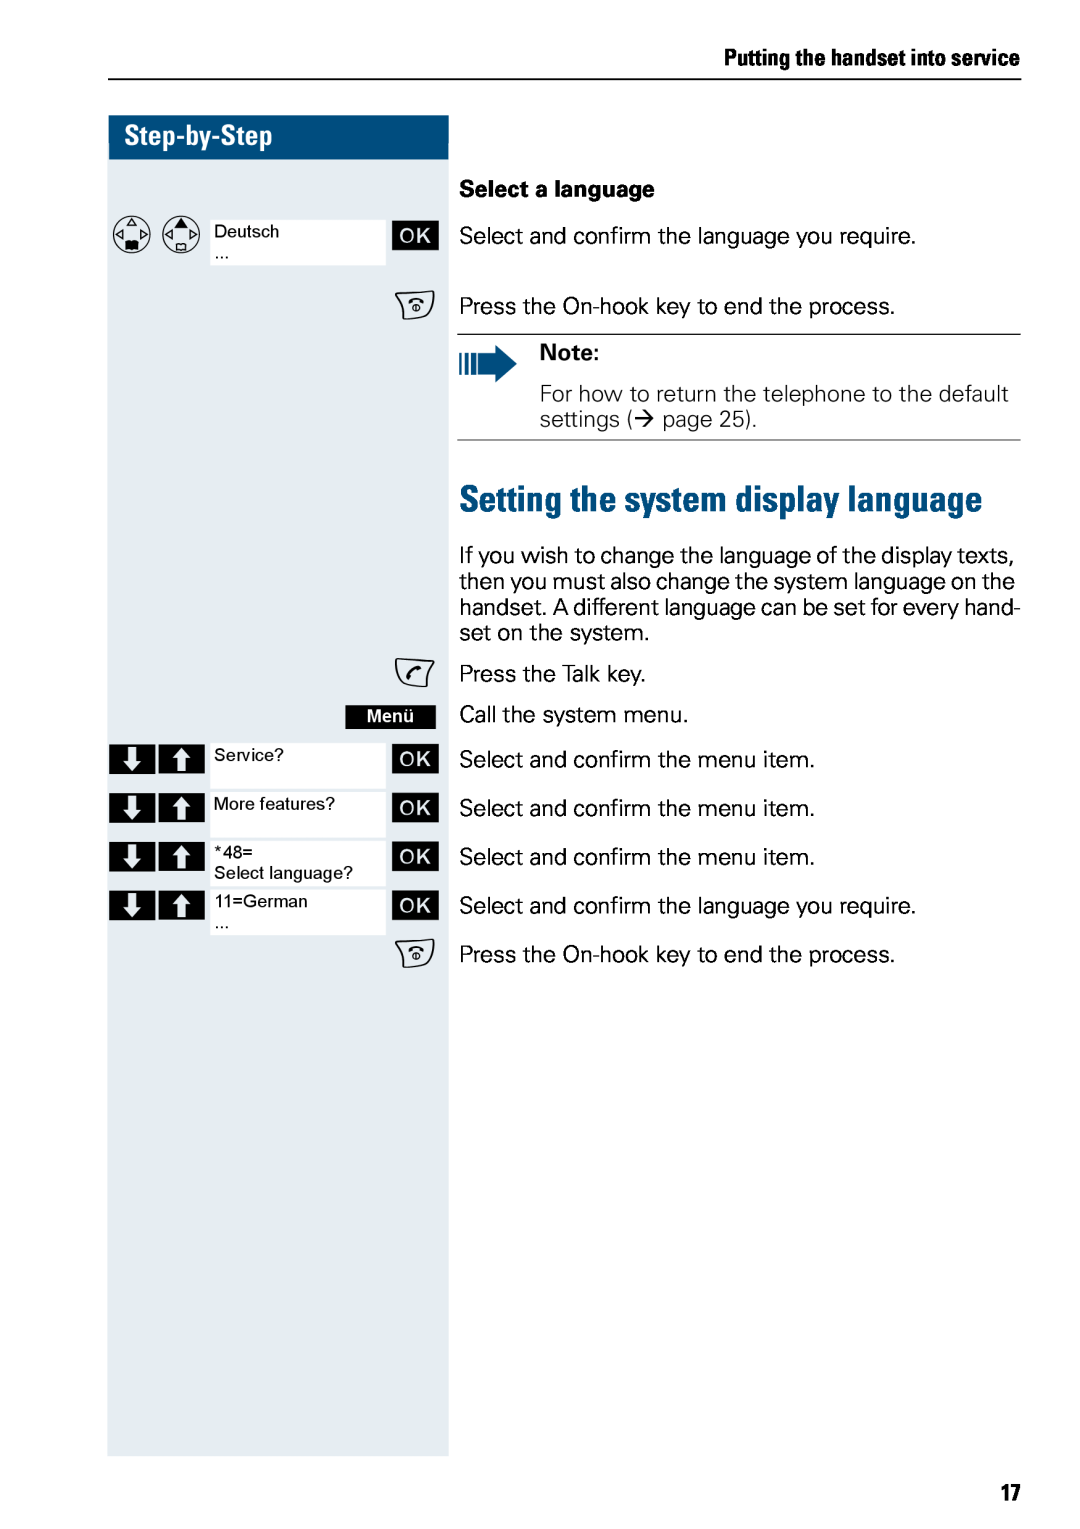 Siemens 500 Setting the system display language, Step-by-Step, Putting the handset into service, Select a language, Menü 